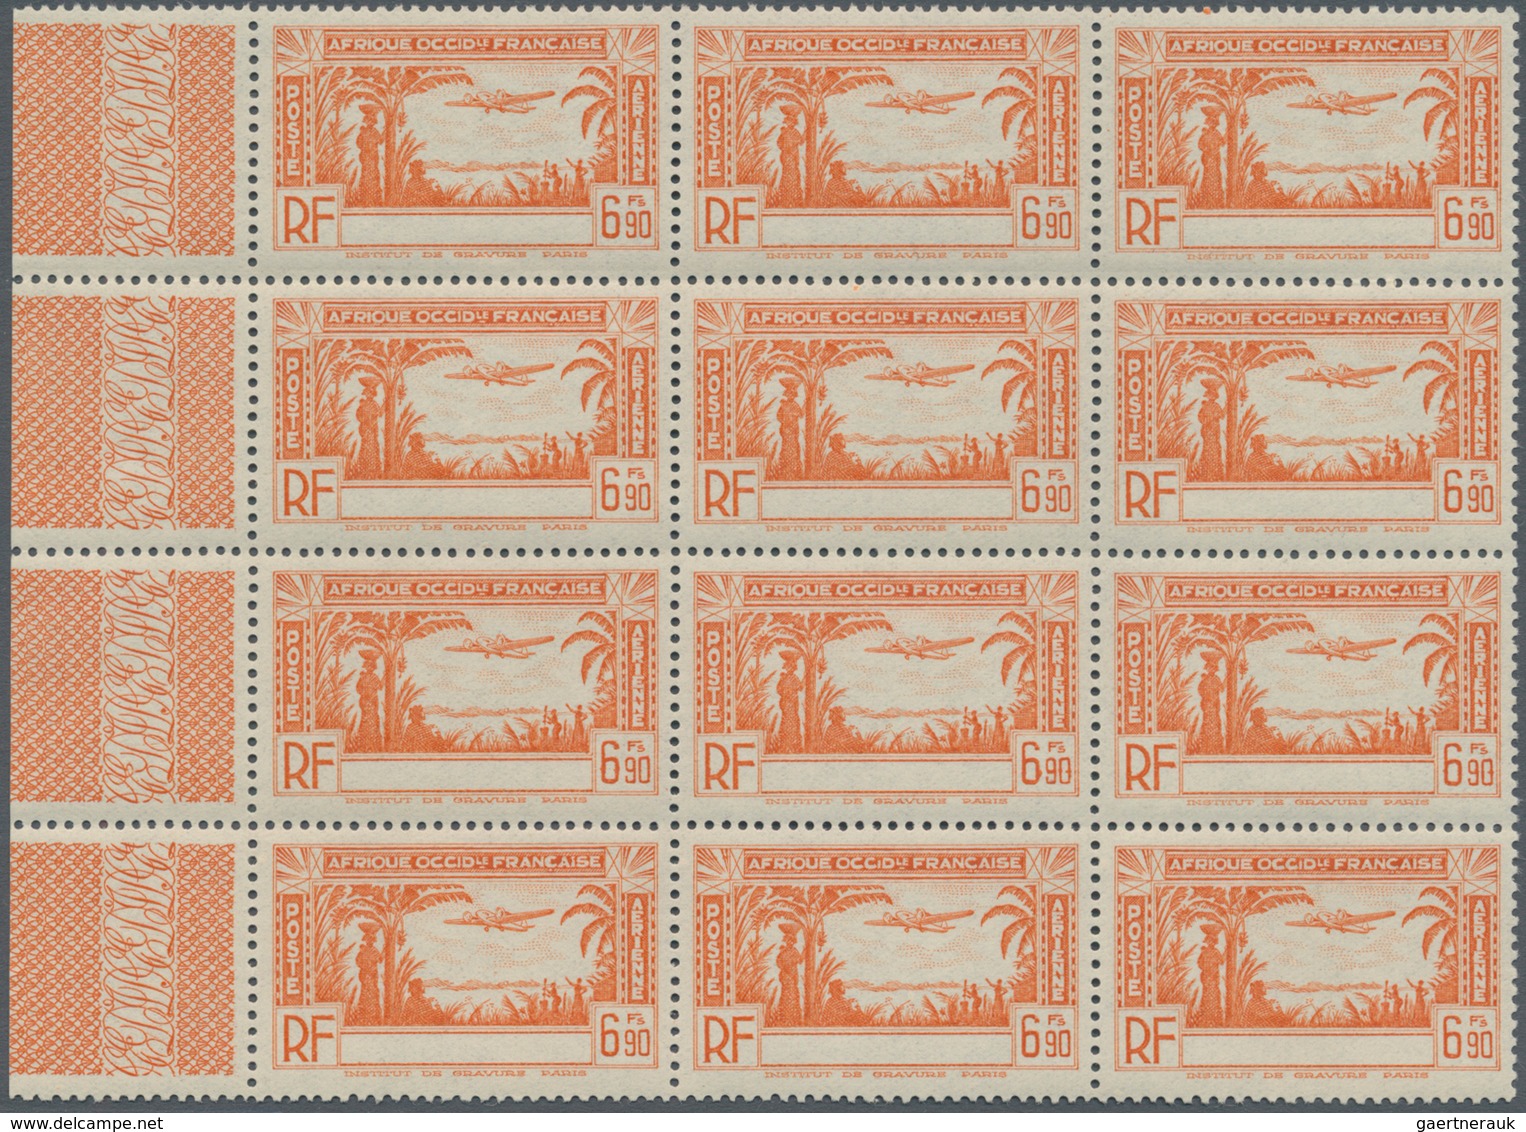 Elfenbeinküste: 1940, Airmail Issue 6.90fr. Orange WITHOUT COUNTRY NAME In A Block Of 12 From Left M - Ivoorkust (1960-...)